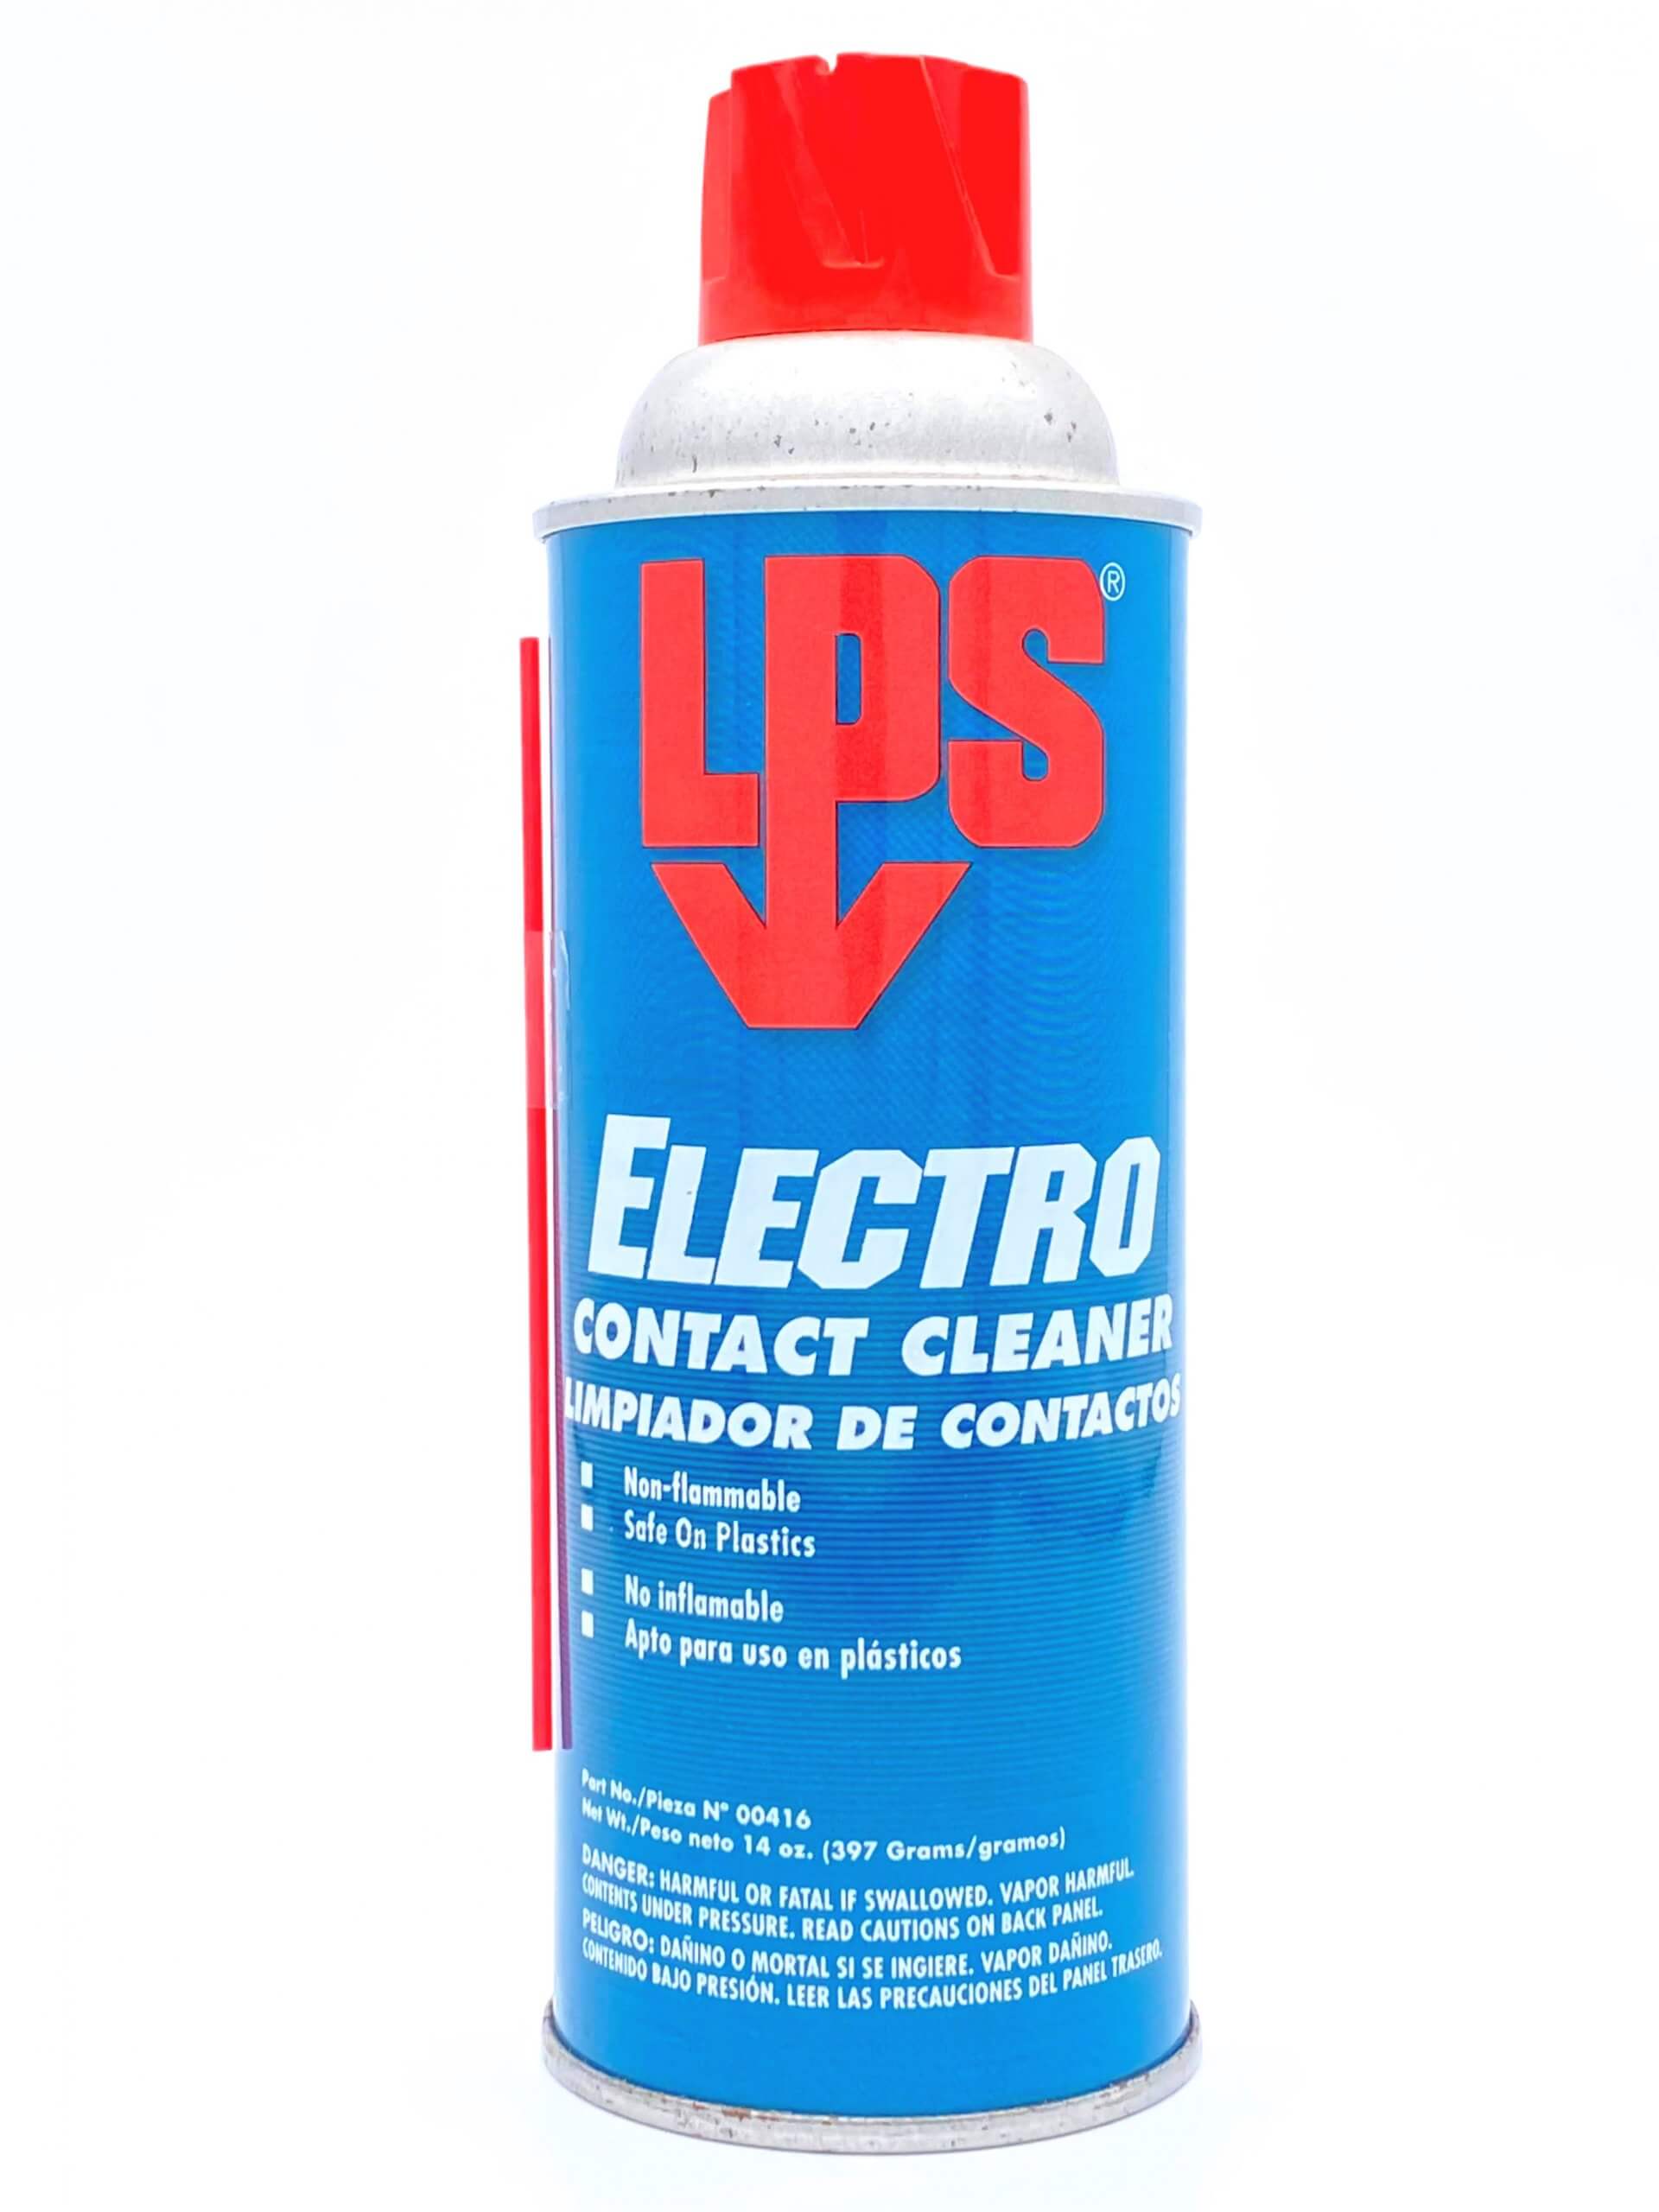 Limpia Contacto No Inflamable LPS NoFlash Electro Contact Cleaner -  TECNIMPORT S.A.